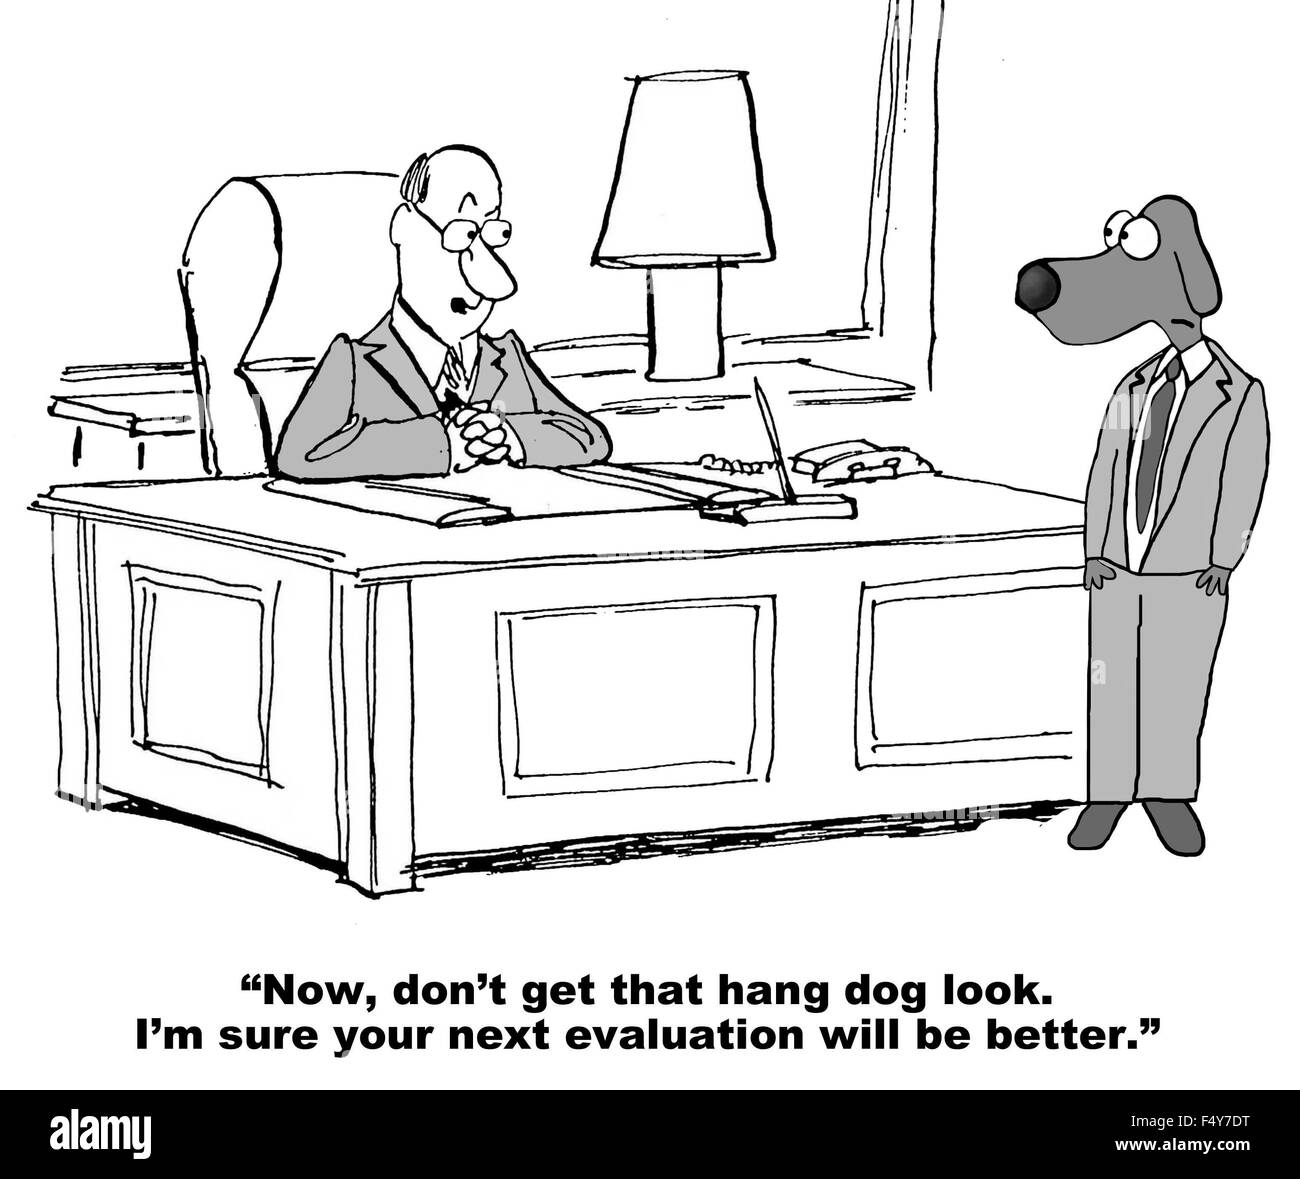 Business cartoon of boss saying to dog, 'Now, don't get that hang dog  look... your next evaluation will be better' Stock Photo - Alamy